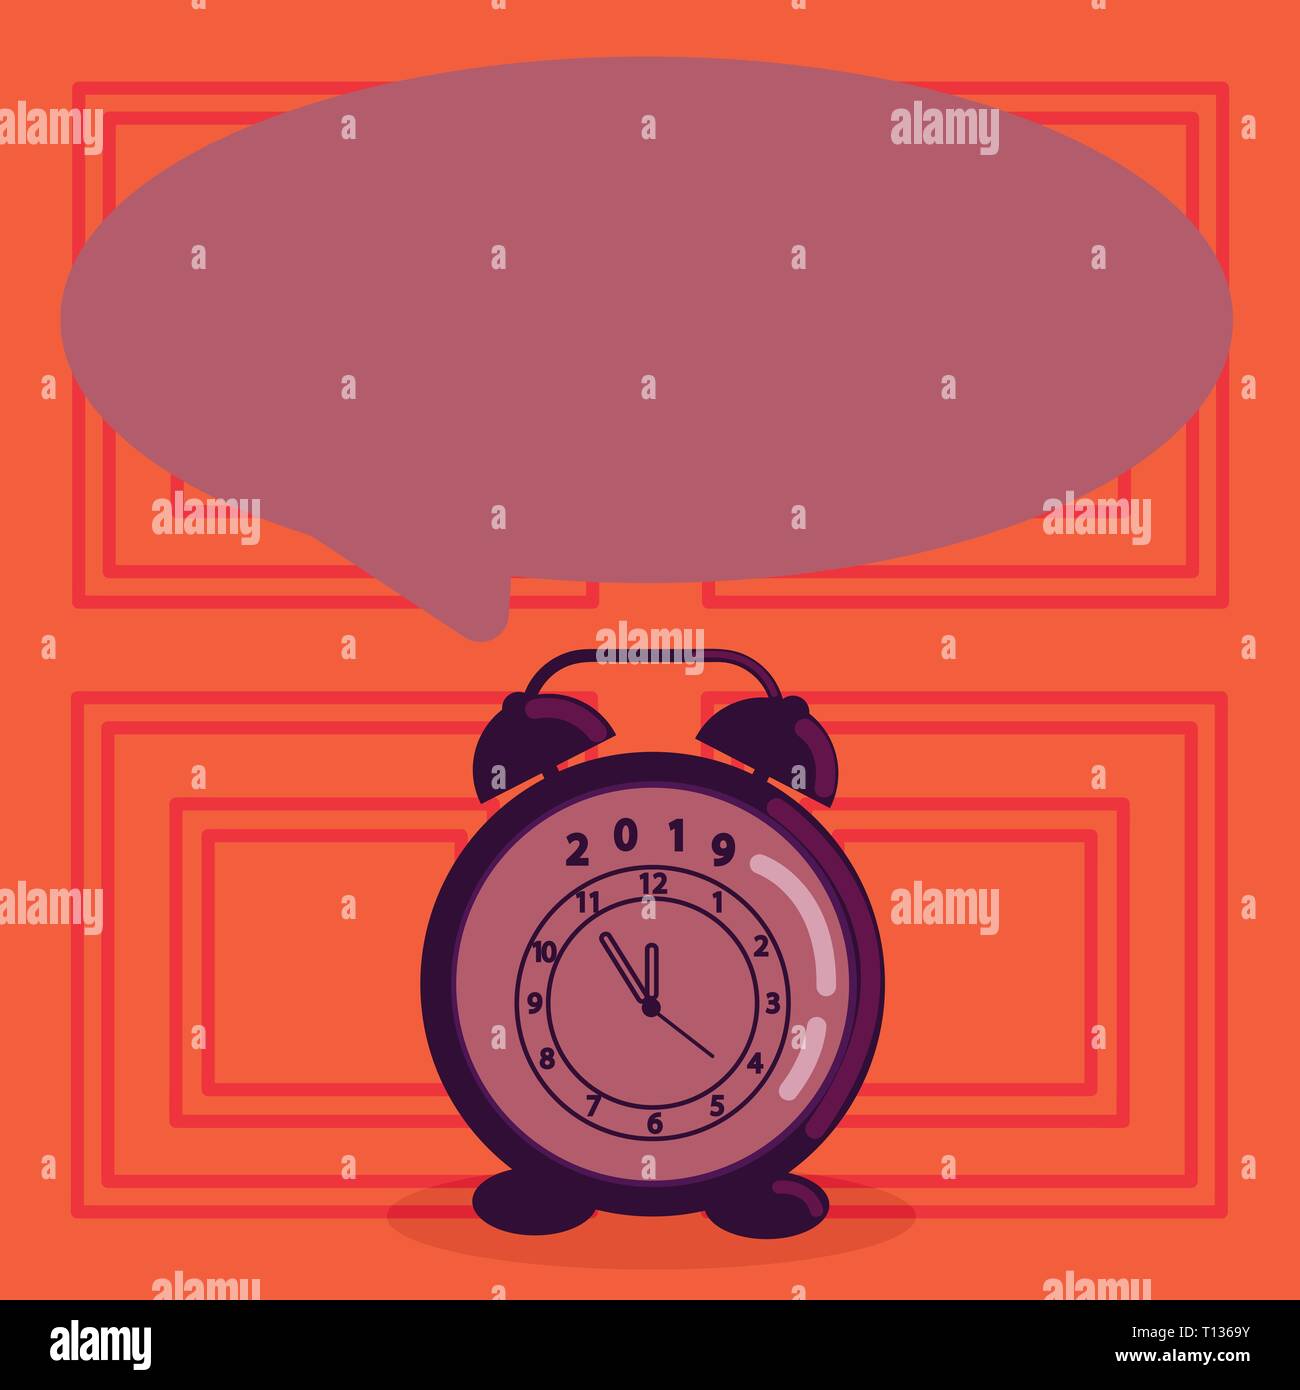 Round Blank Speech Balloon in Pastel Shade and Colorful Analog Alarm Clock Design business concept Empty copy space modern abstract background Stock Vector